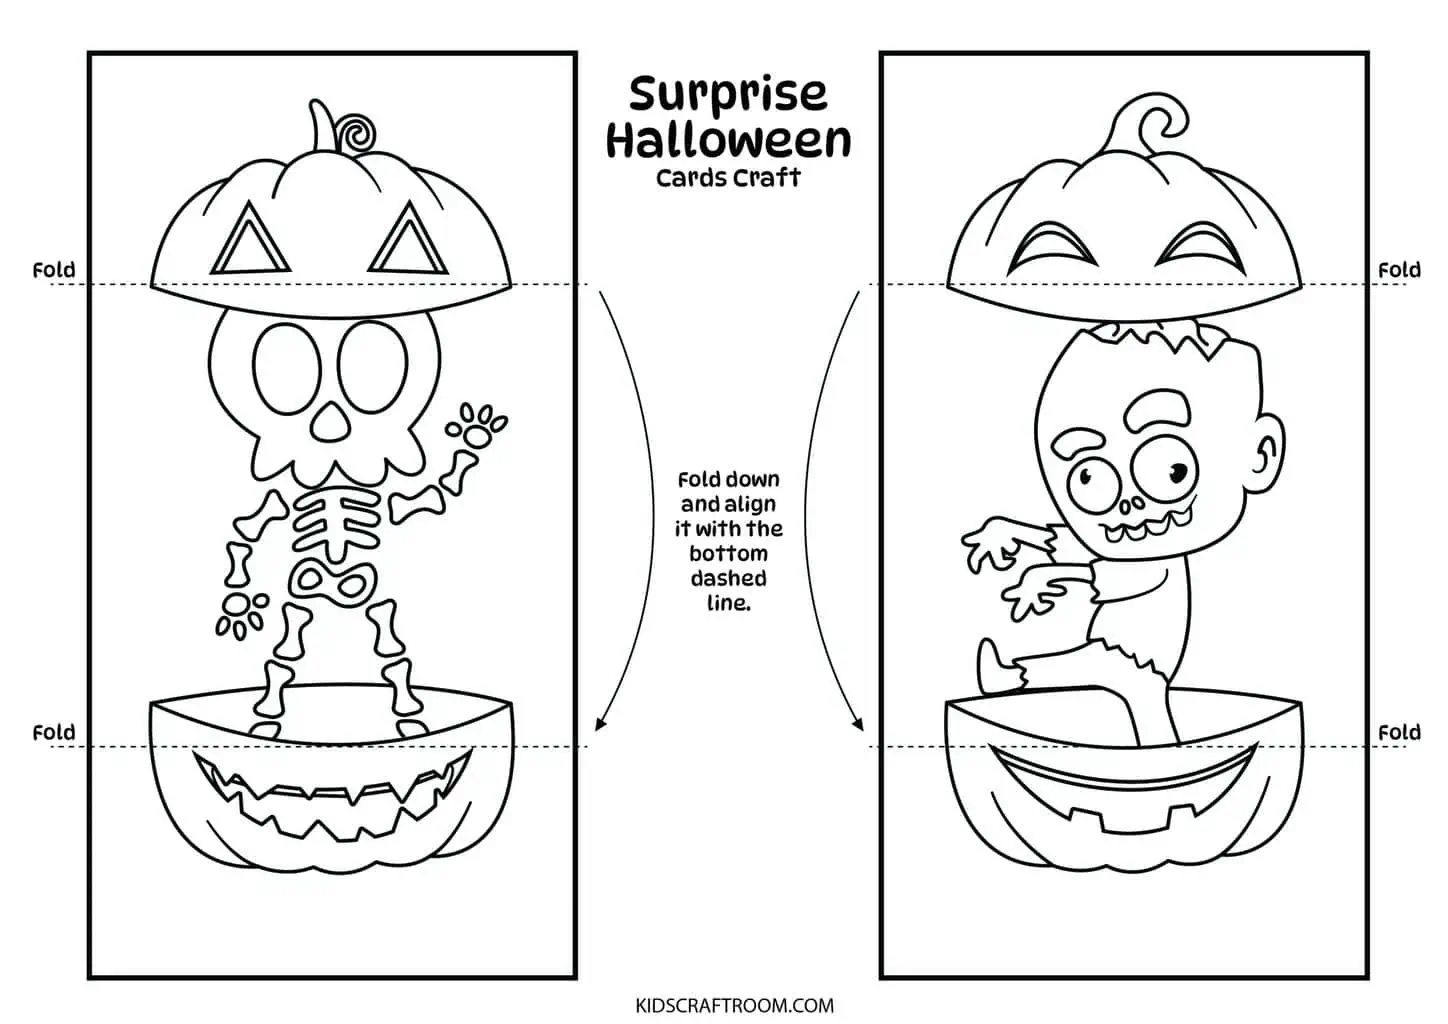 The printable templates for a skeleton and a zombie surprise halloween craft for kids.